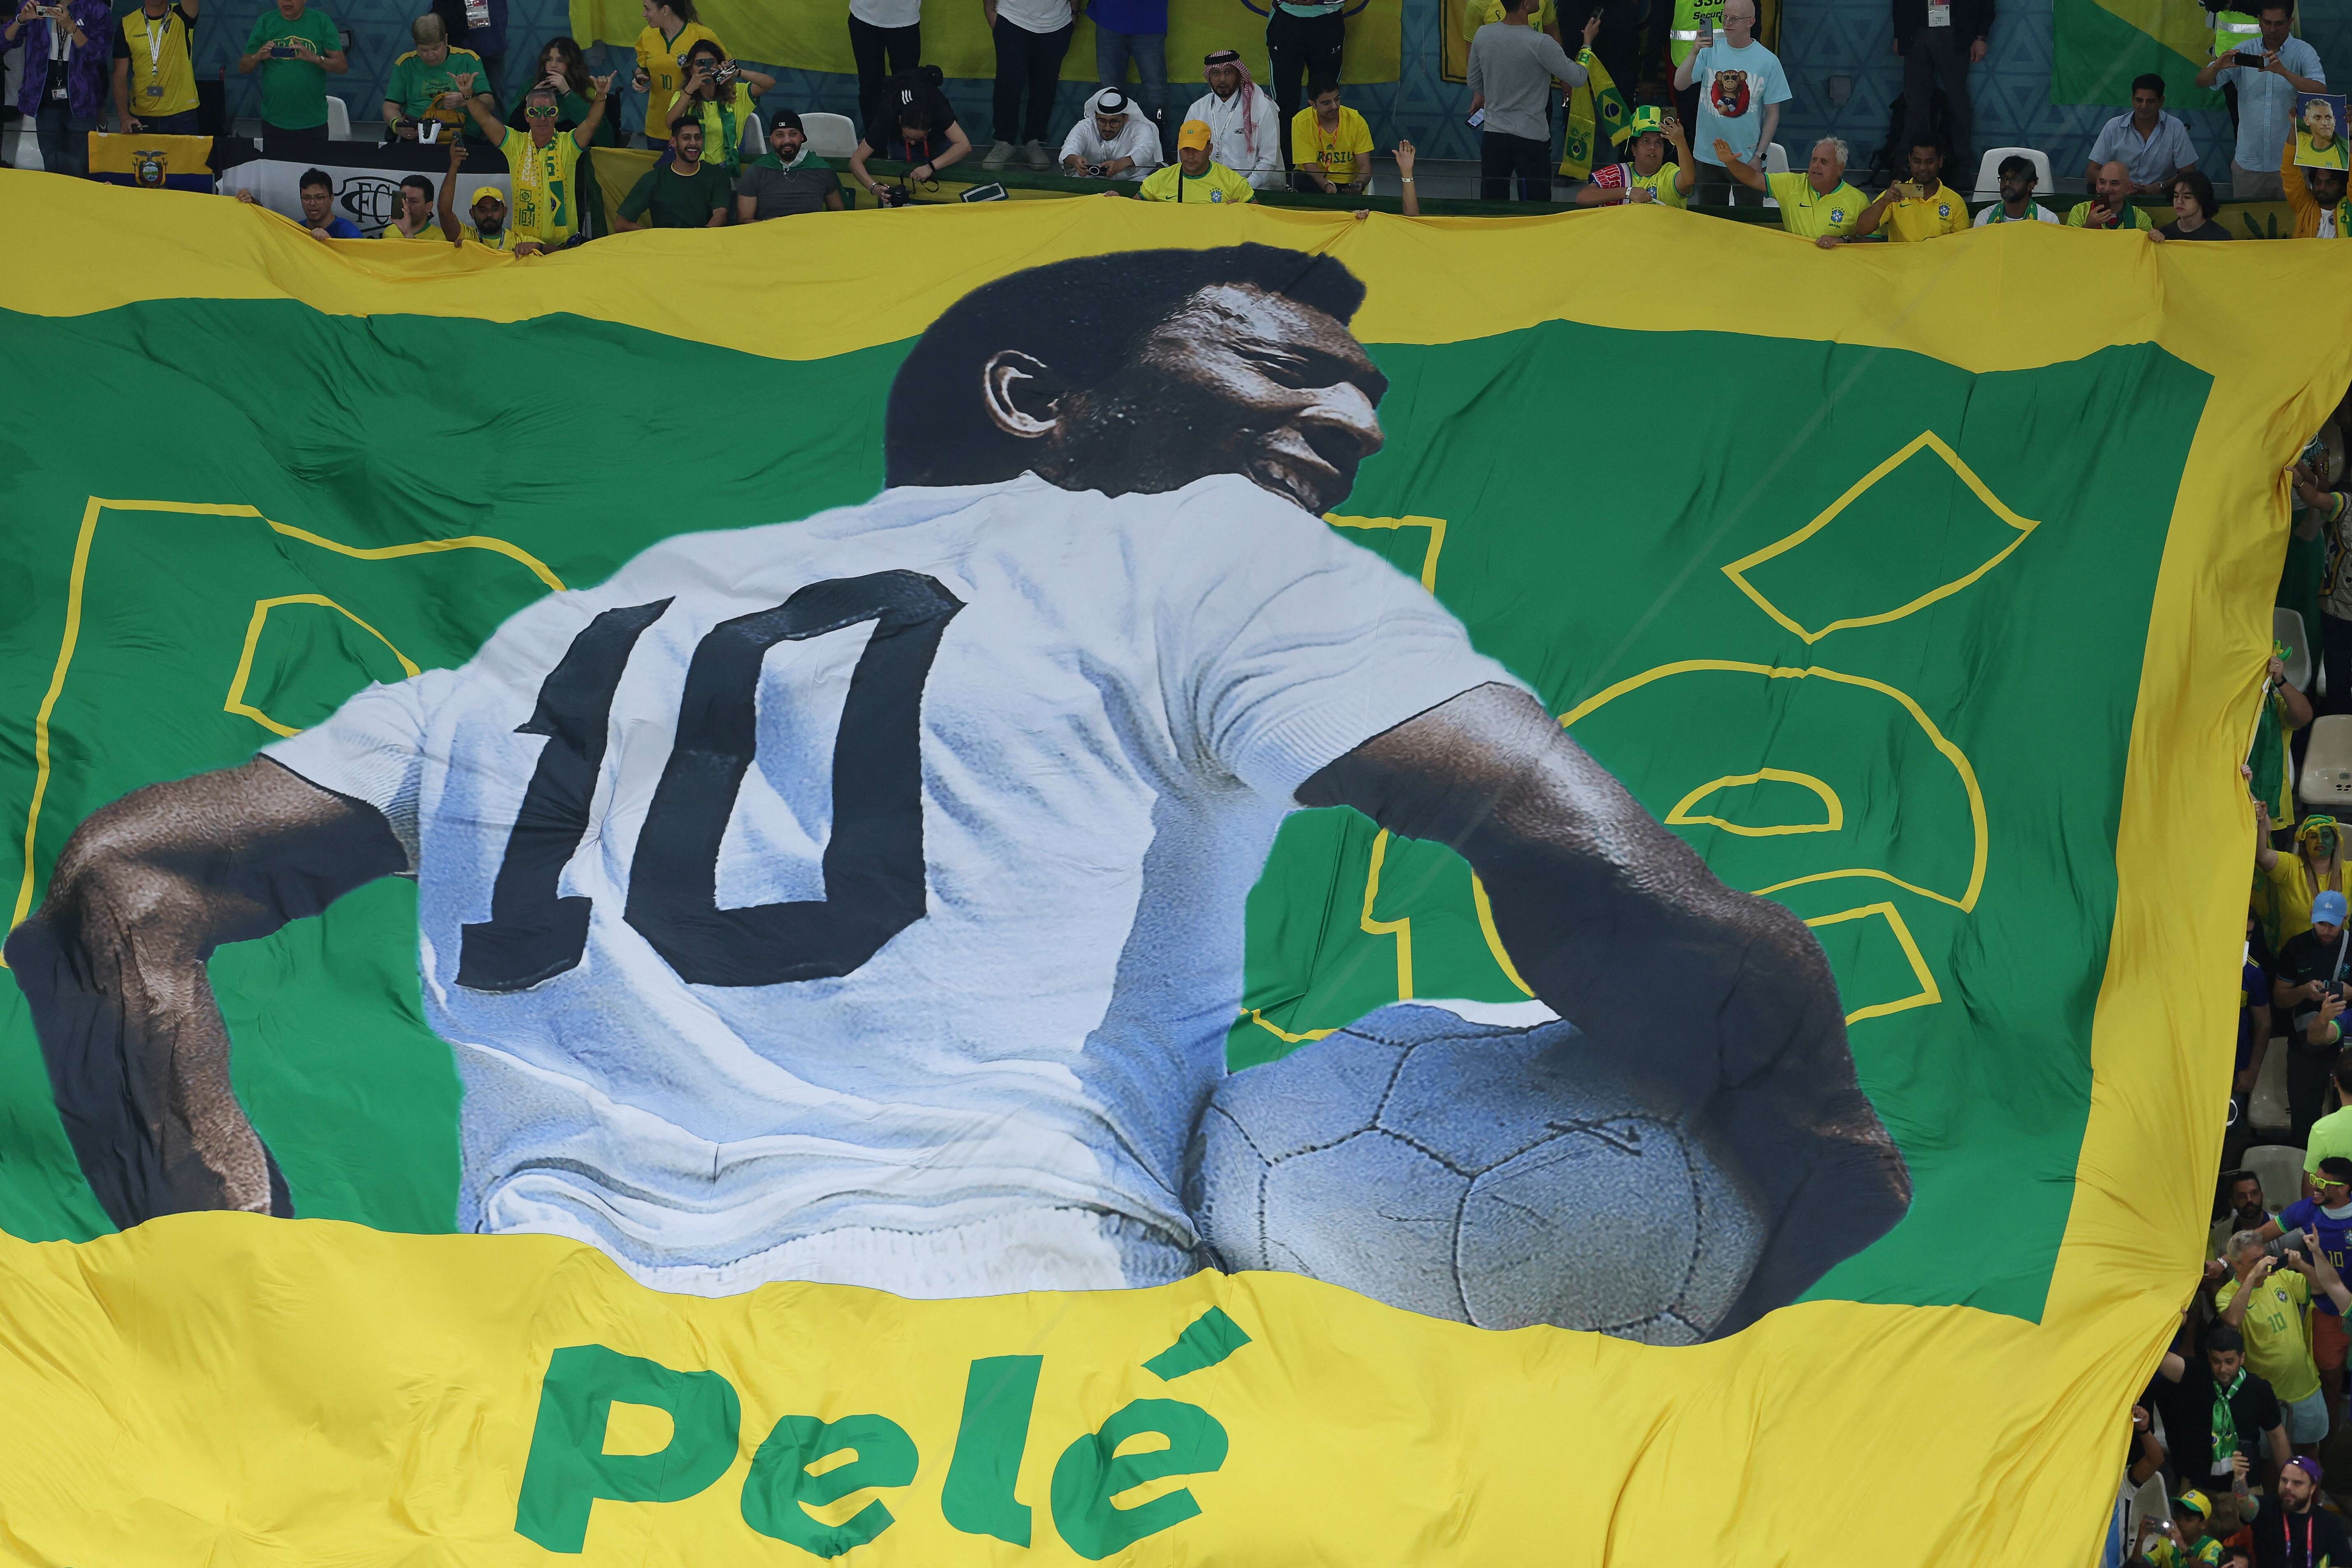 A large flag of Brazil legend Pele is unveiled in the crowd ahead of the Qatar 2022 World Cup Group G football match between Cameroon and Brazil at the Lusail Stadium in Lusail, north of Doha on December 2, 2022. (Photo by Giuseppe CACACE / AFP)